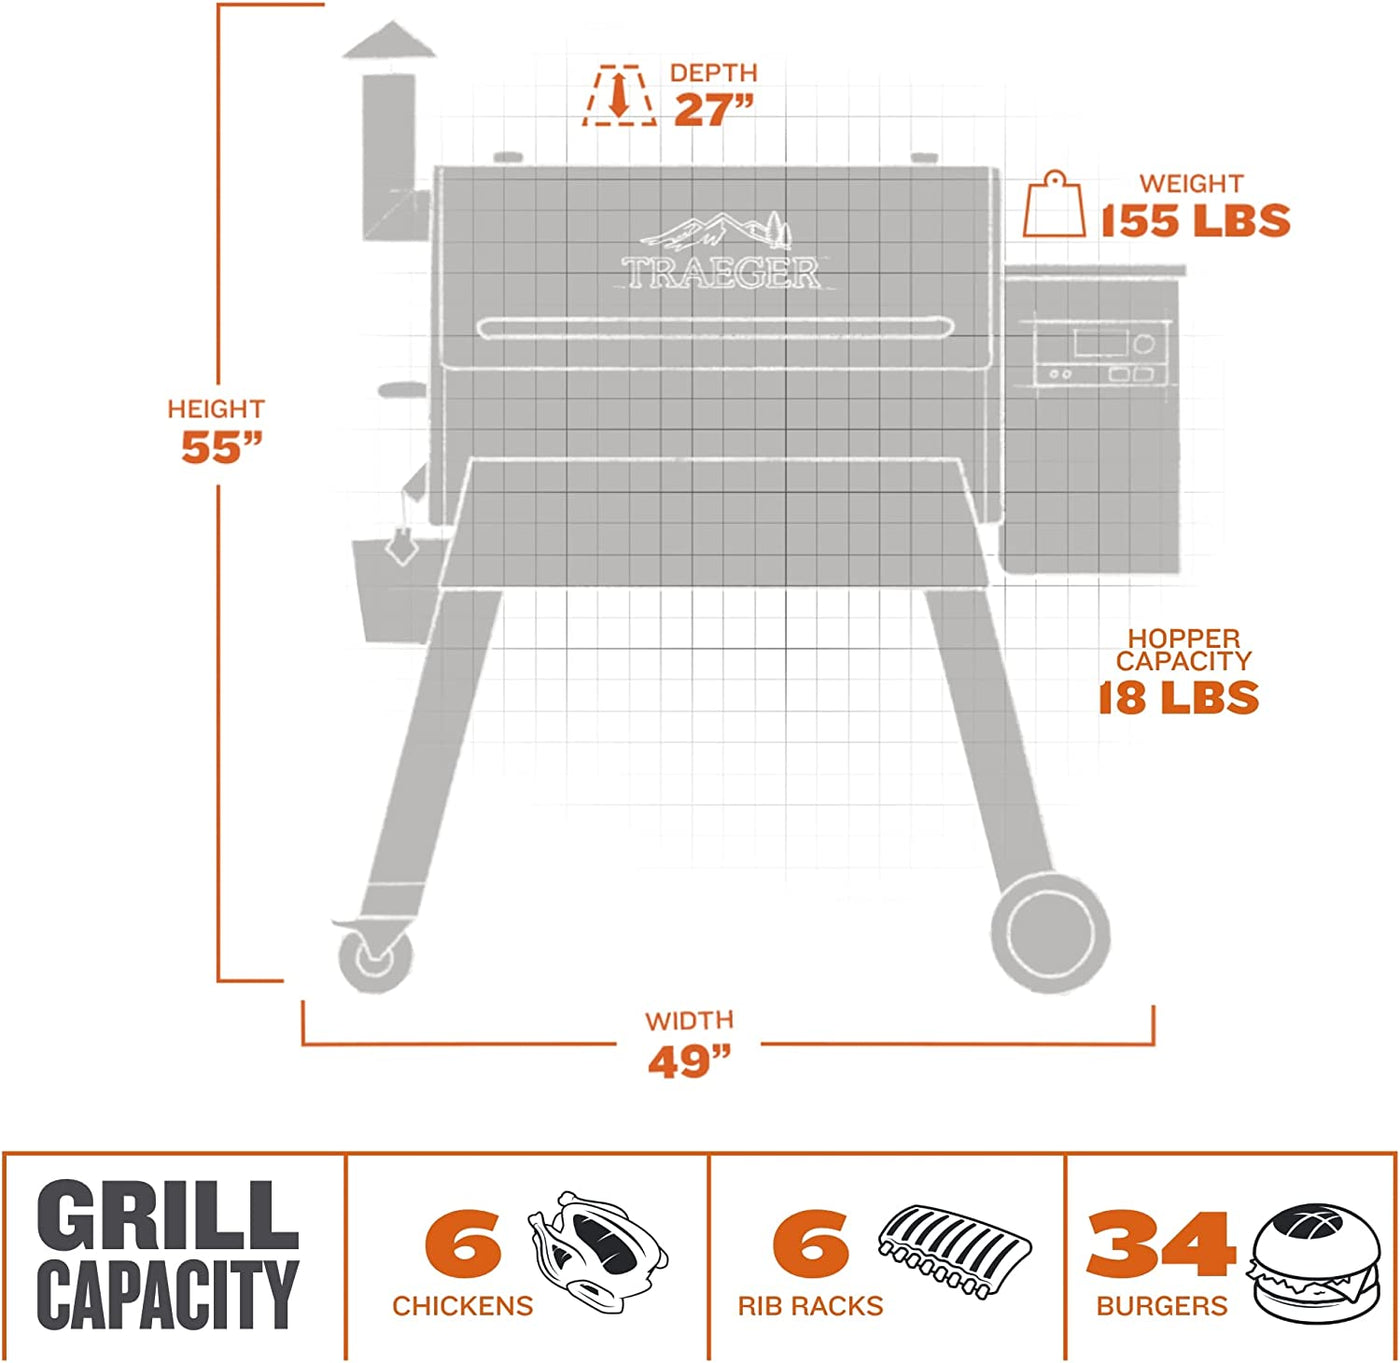 Traeger Grills Pro Series 780 Wood Pellet Grill and Smoker - $700